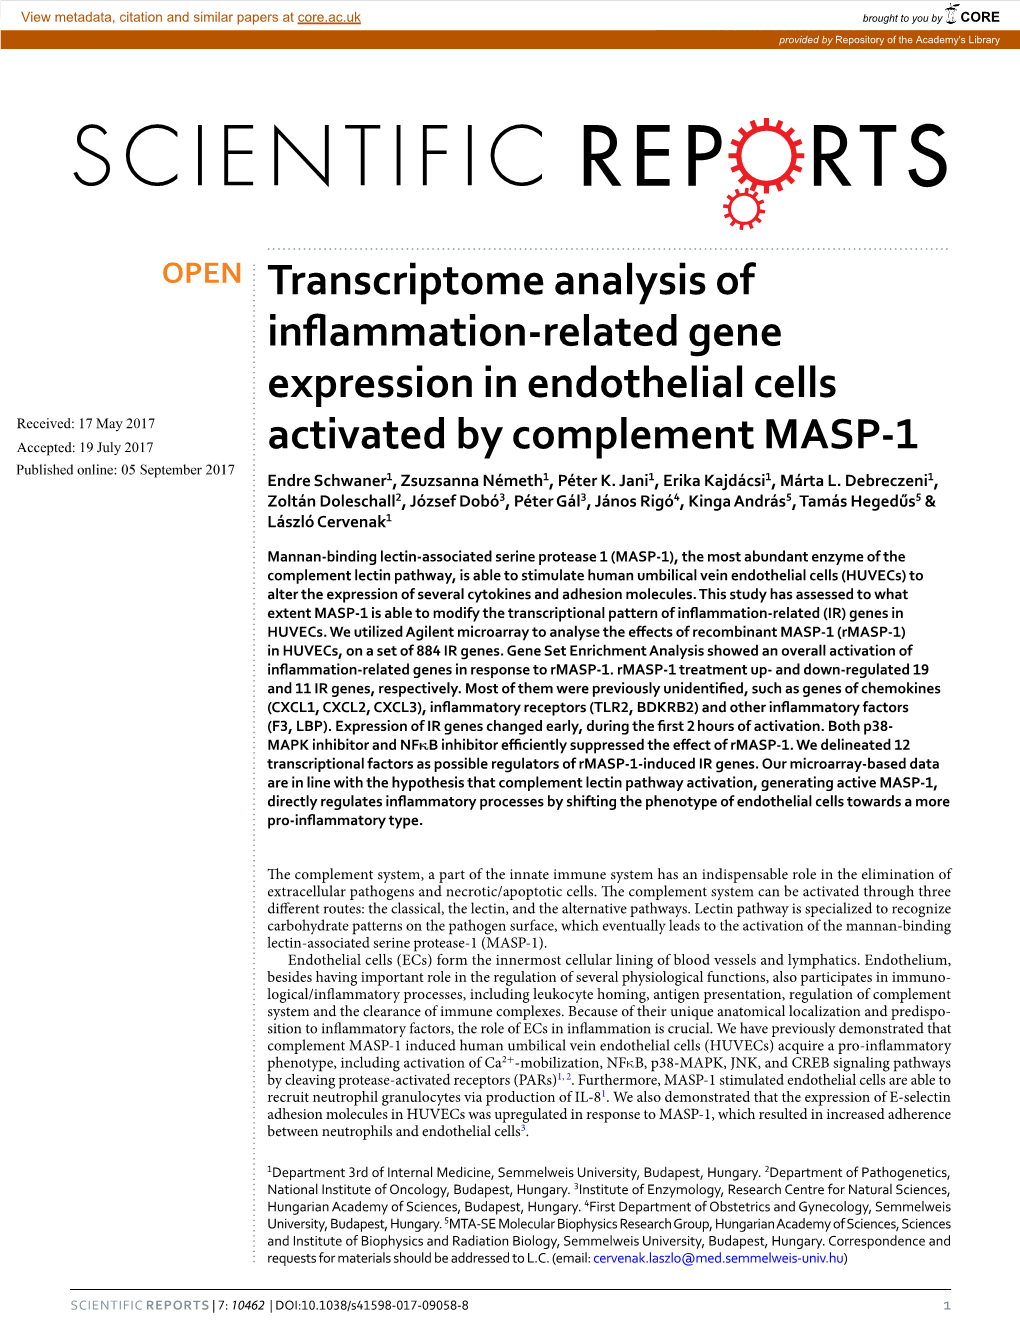 Transcriptome Analysis of Inflammation-Related Gene